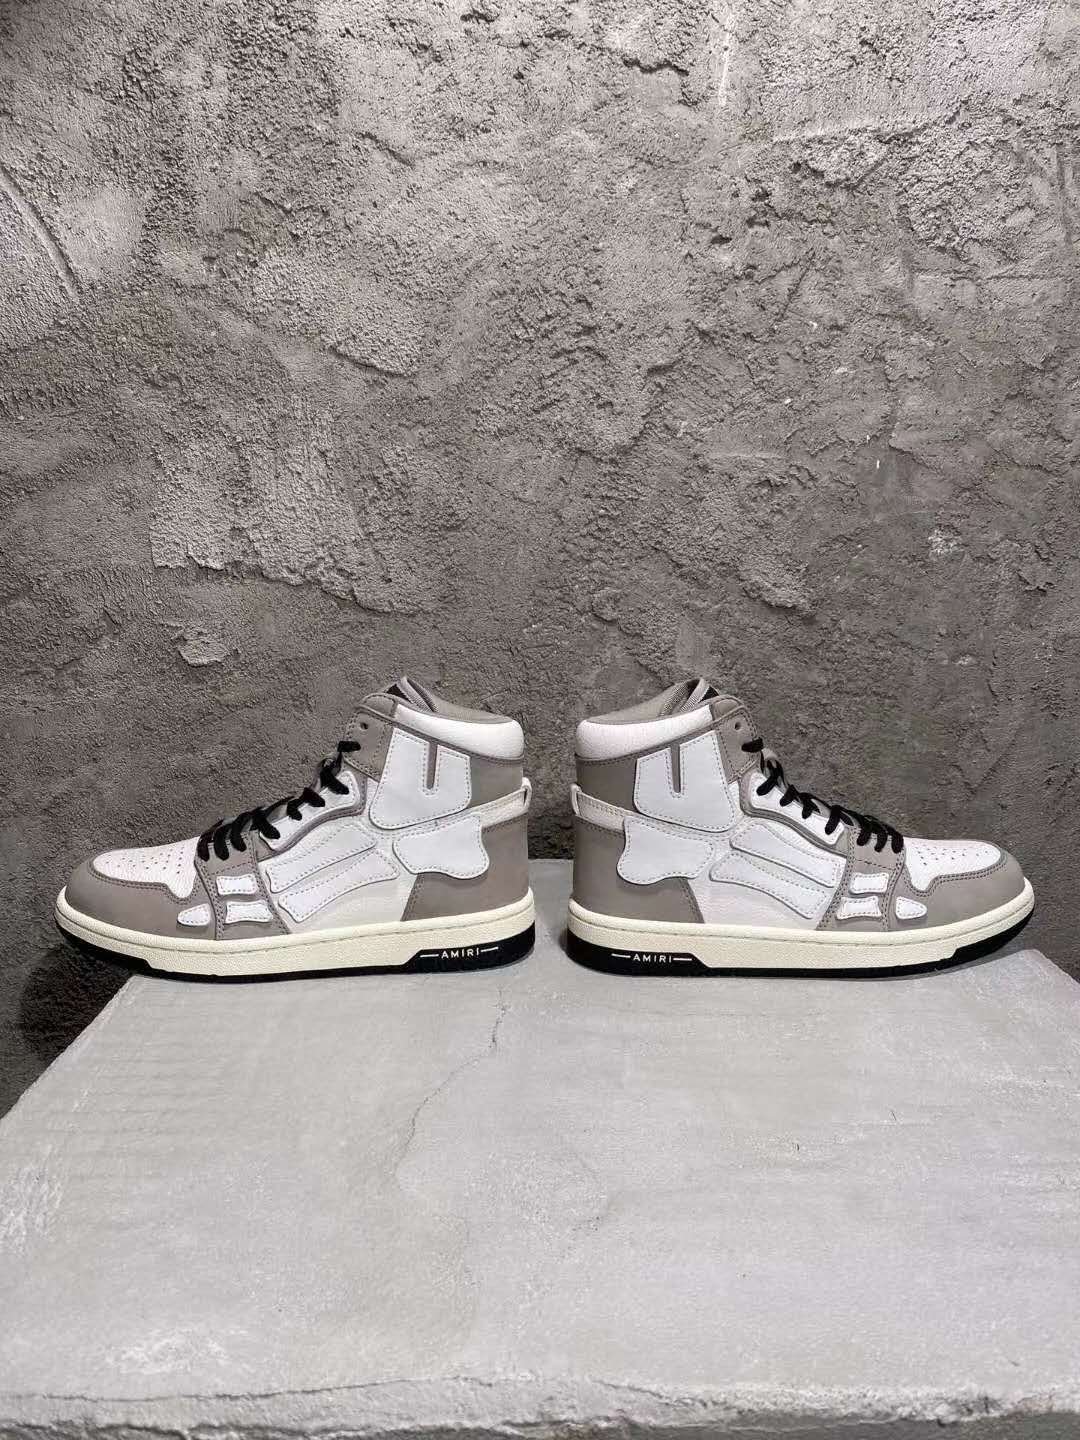 Men's Shoes Amiri Skel High-top Sneakers Skeleton White Gray Lace-up ...